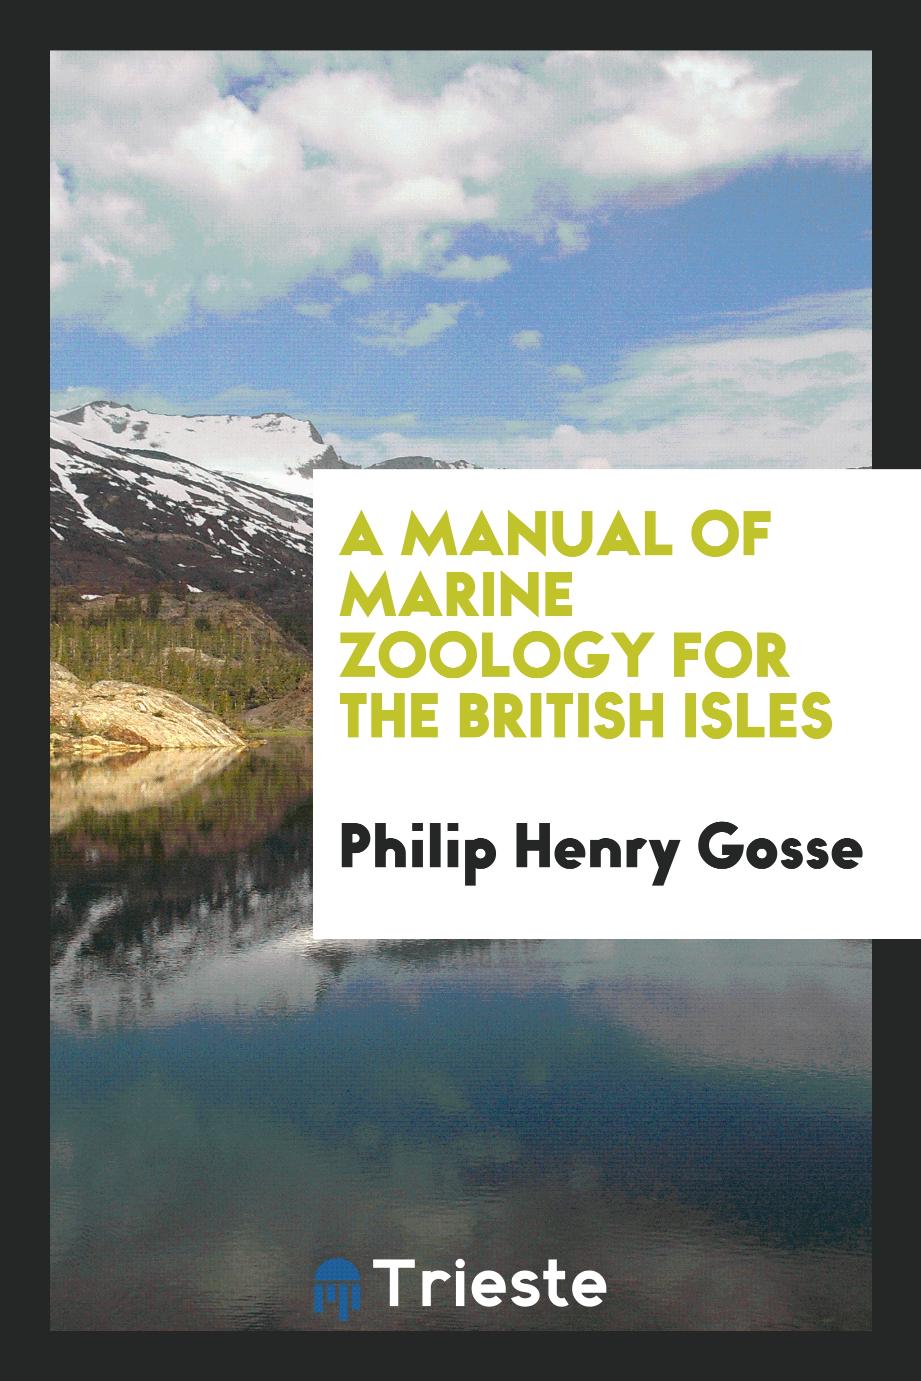 A manual of marine zoology for the British Isles